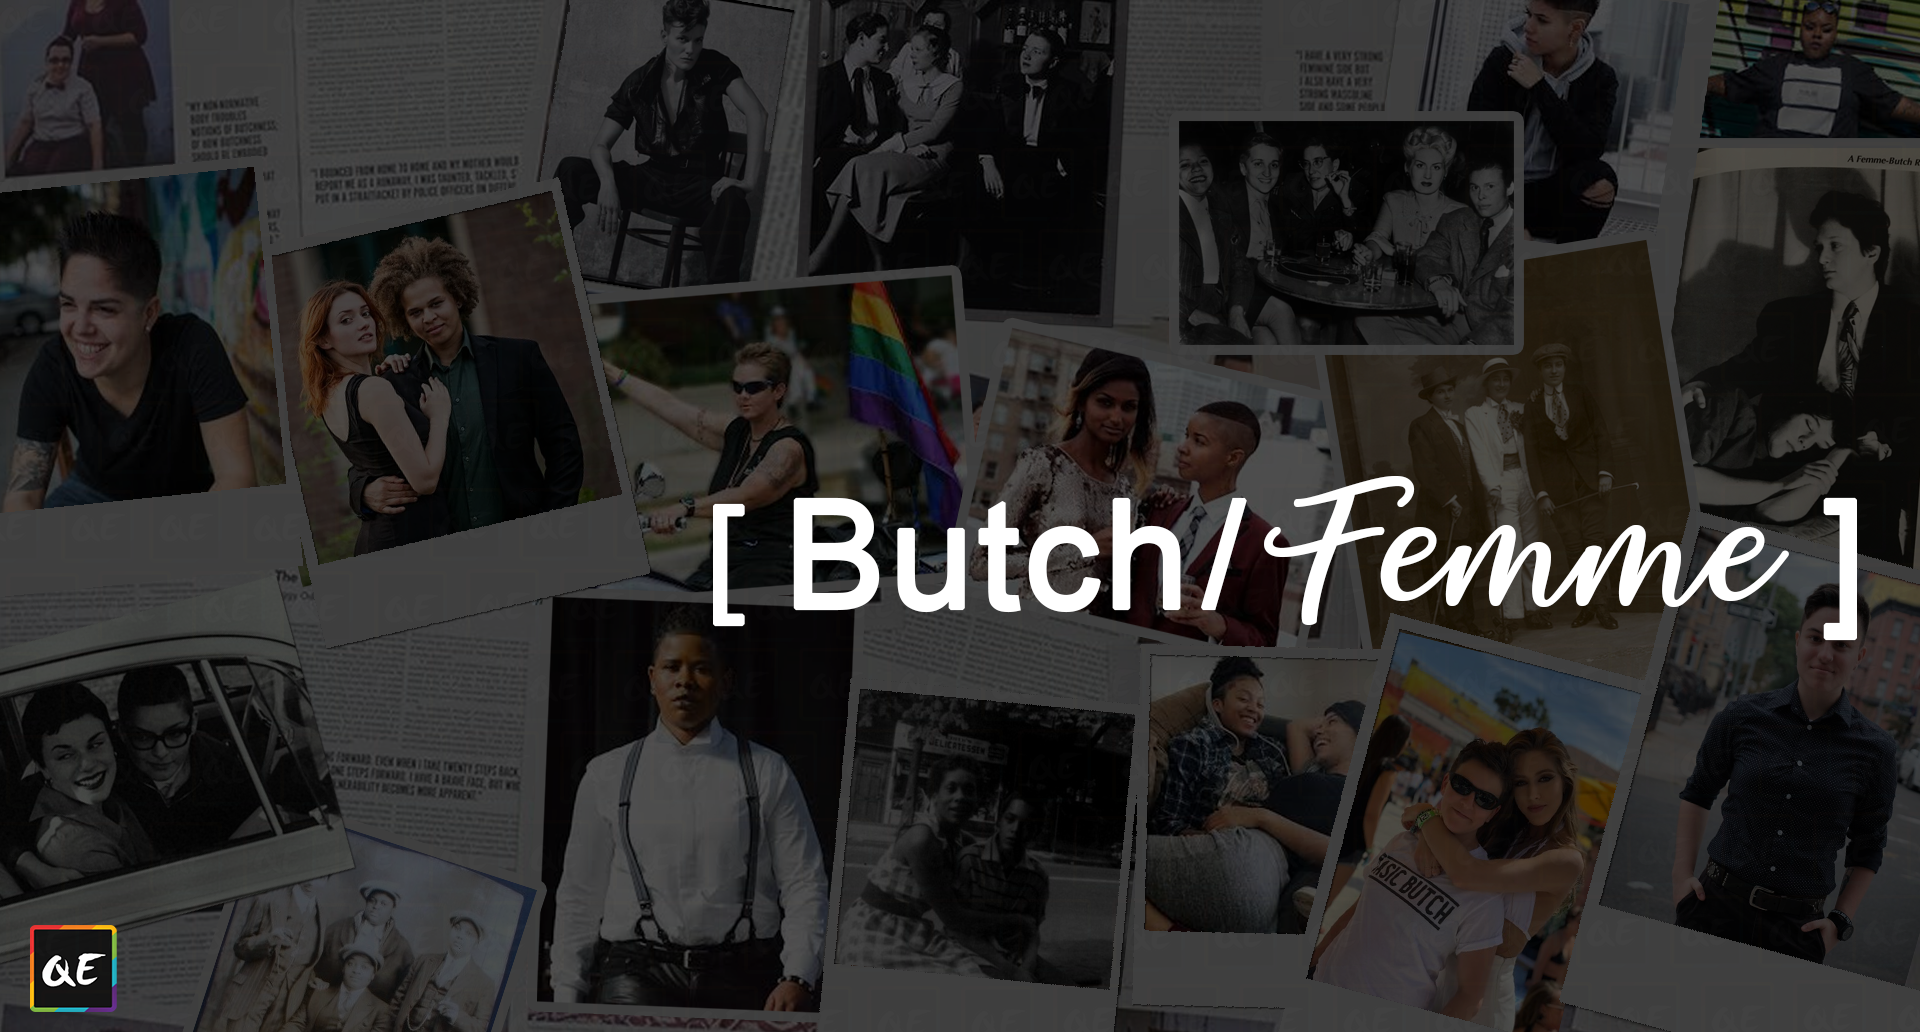 QueerEvents.ca - Queer Culture - lesbian subculture butch femme